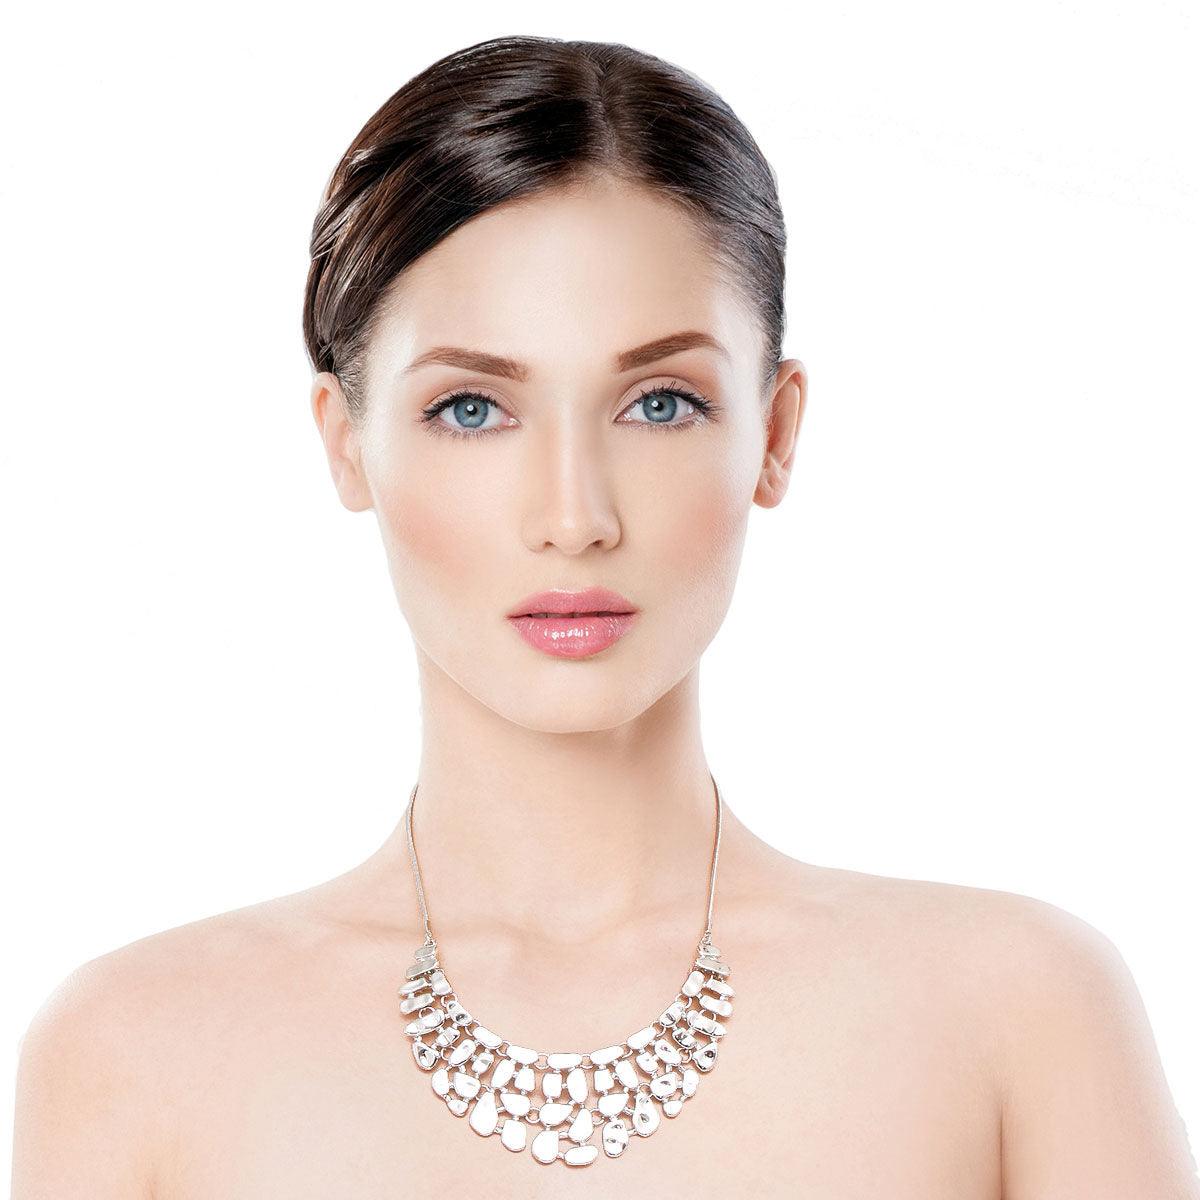 Fashion Jewelry: Silver Pebble Necklace Set to Complete Your Look